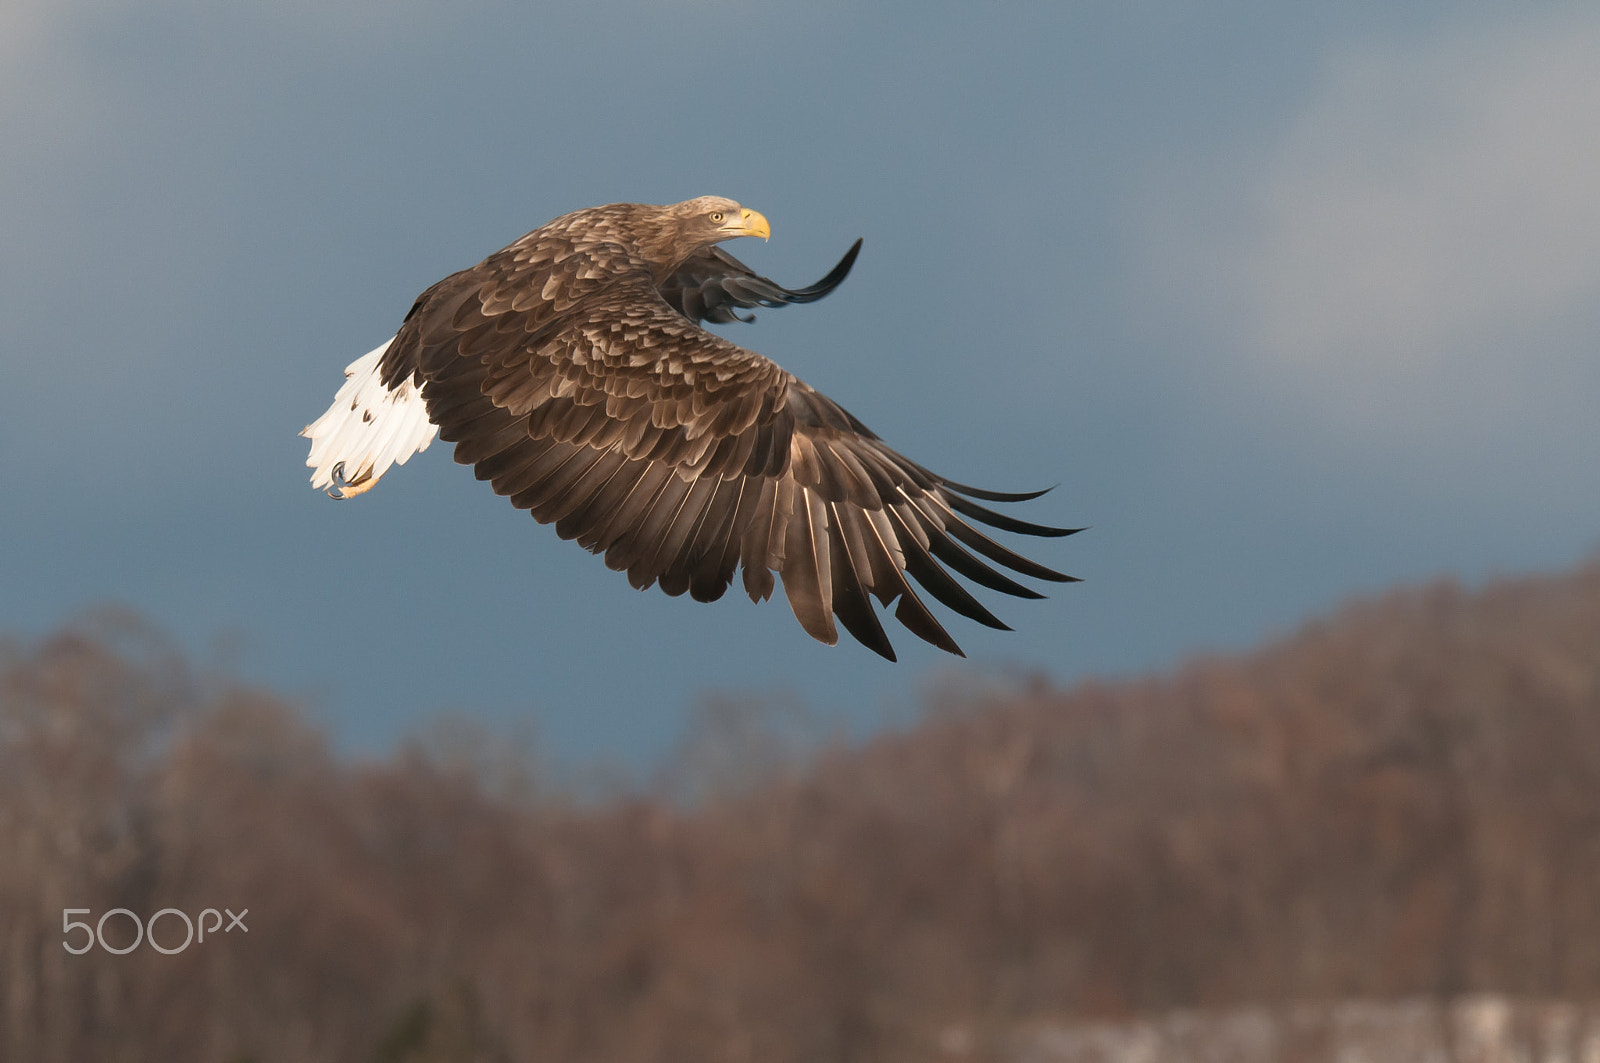 Nikon D300 + Sigma 150-600mm F5-6.3 DG OS HSM | S sample photo. Feather flexible powerfully photography